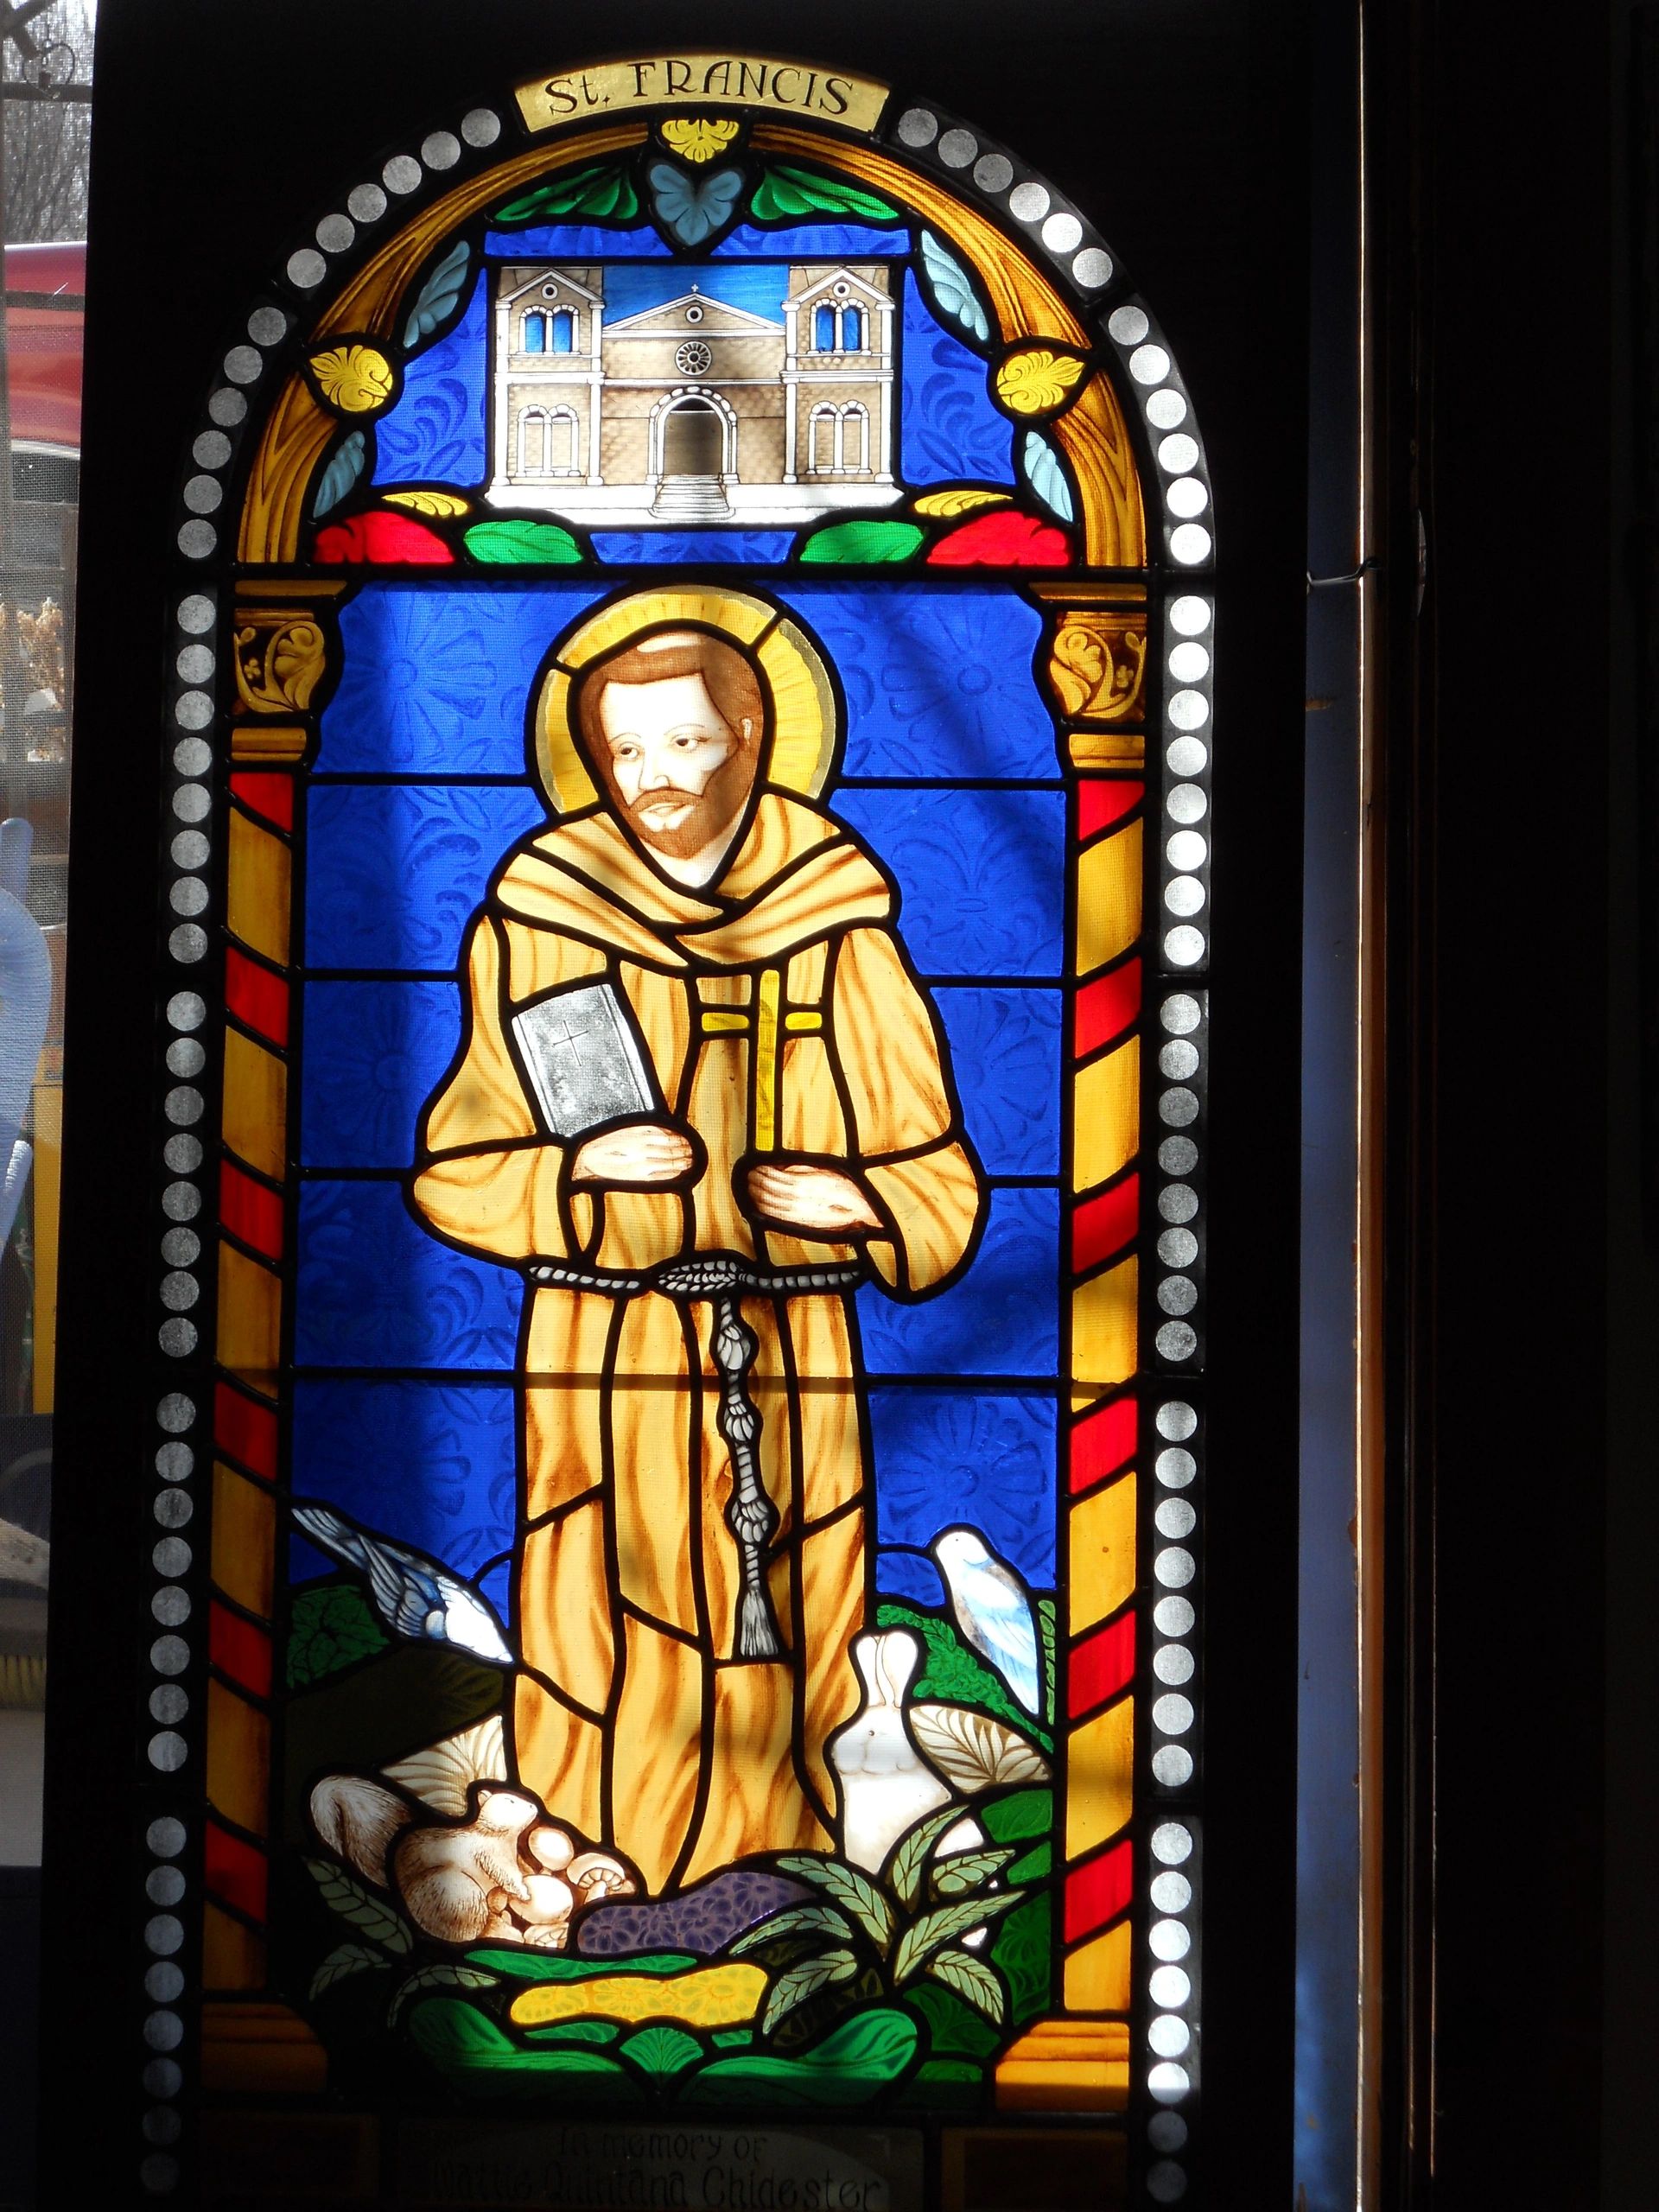 Stained glass of St. Francis of Assisi, painted golden robes against a cobalt blue background with g